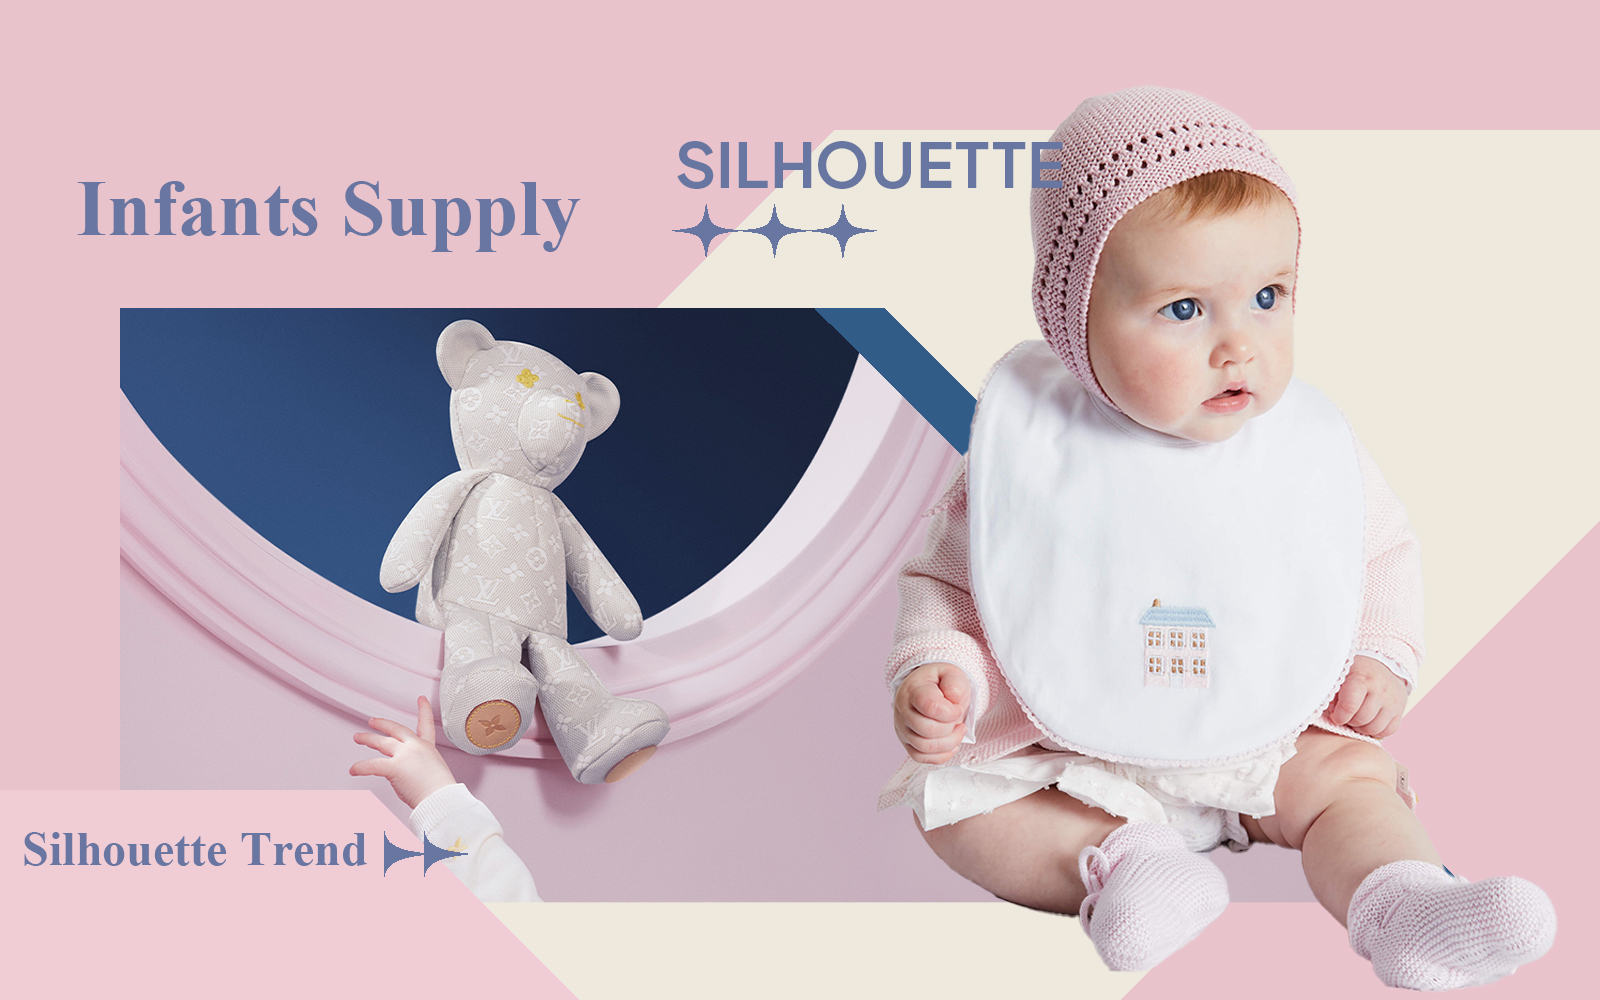 The Silhouette Trend for Infants Supply